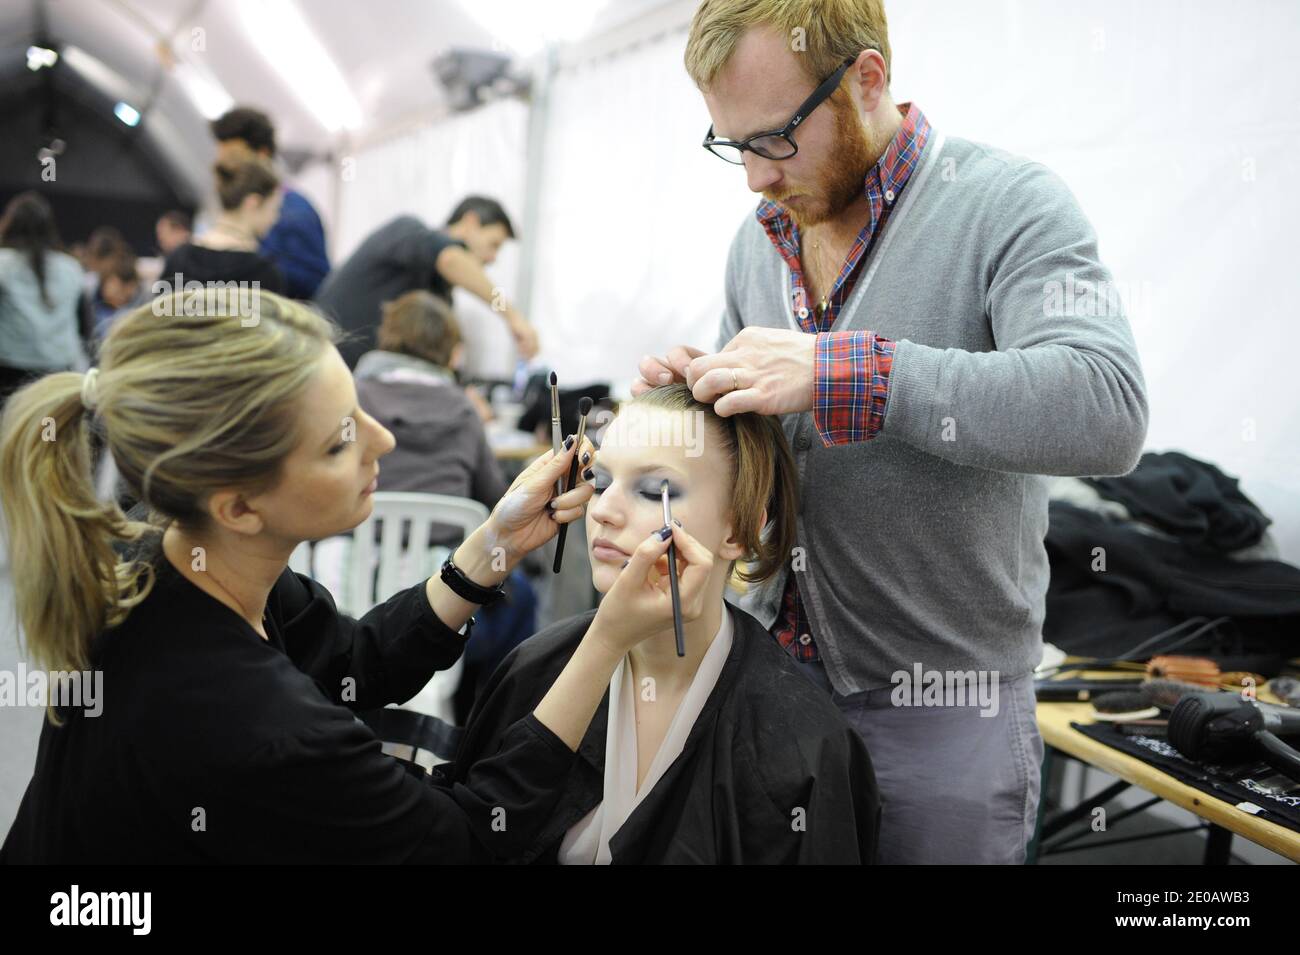 John Galliano Paris Ready to Wear Autumn Winter Twenties style make up,  finger waved hair and long quilted print coat Stock Photo - Alamy